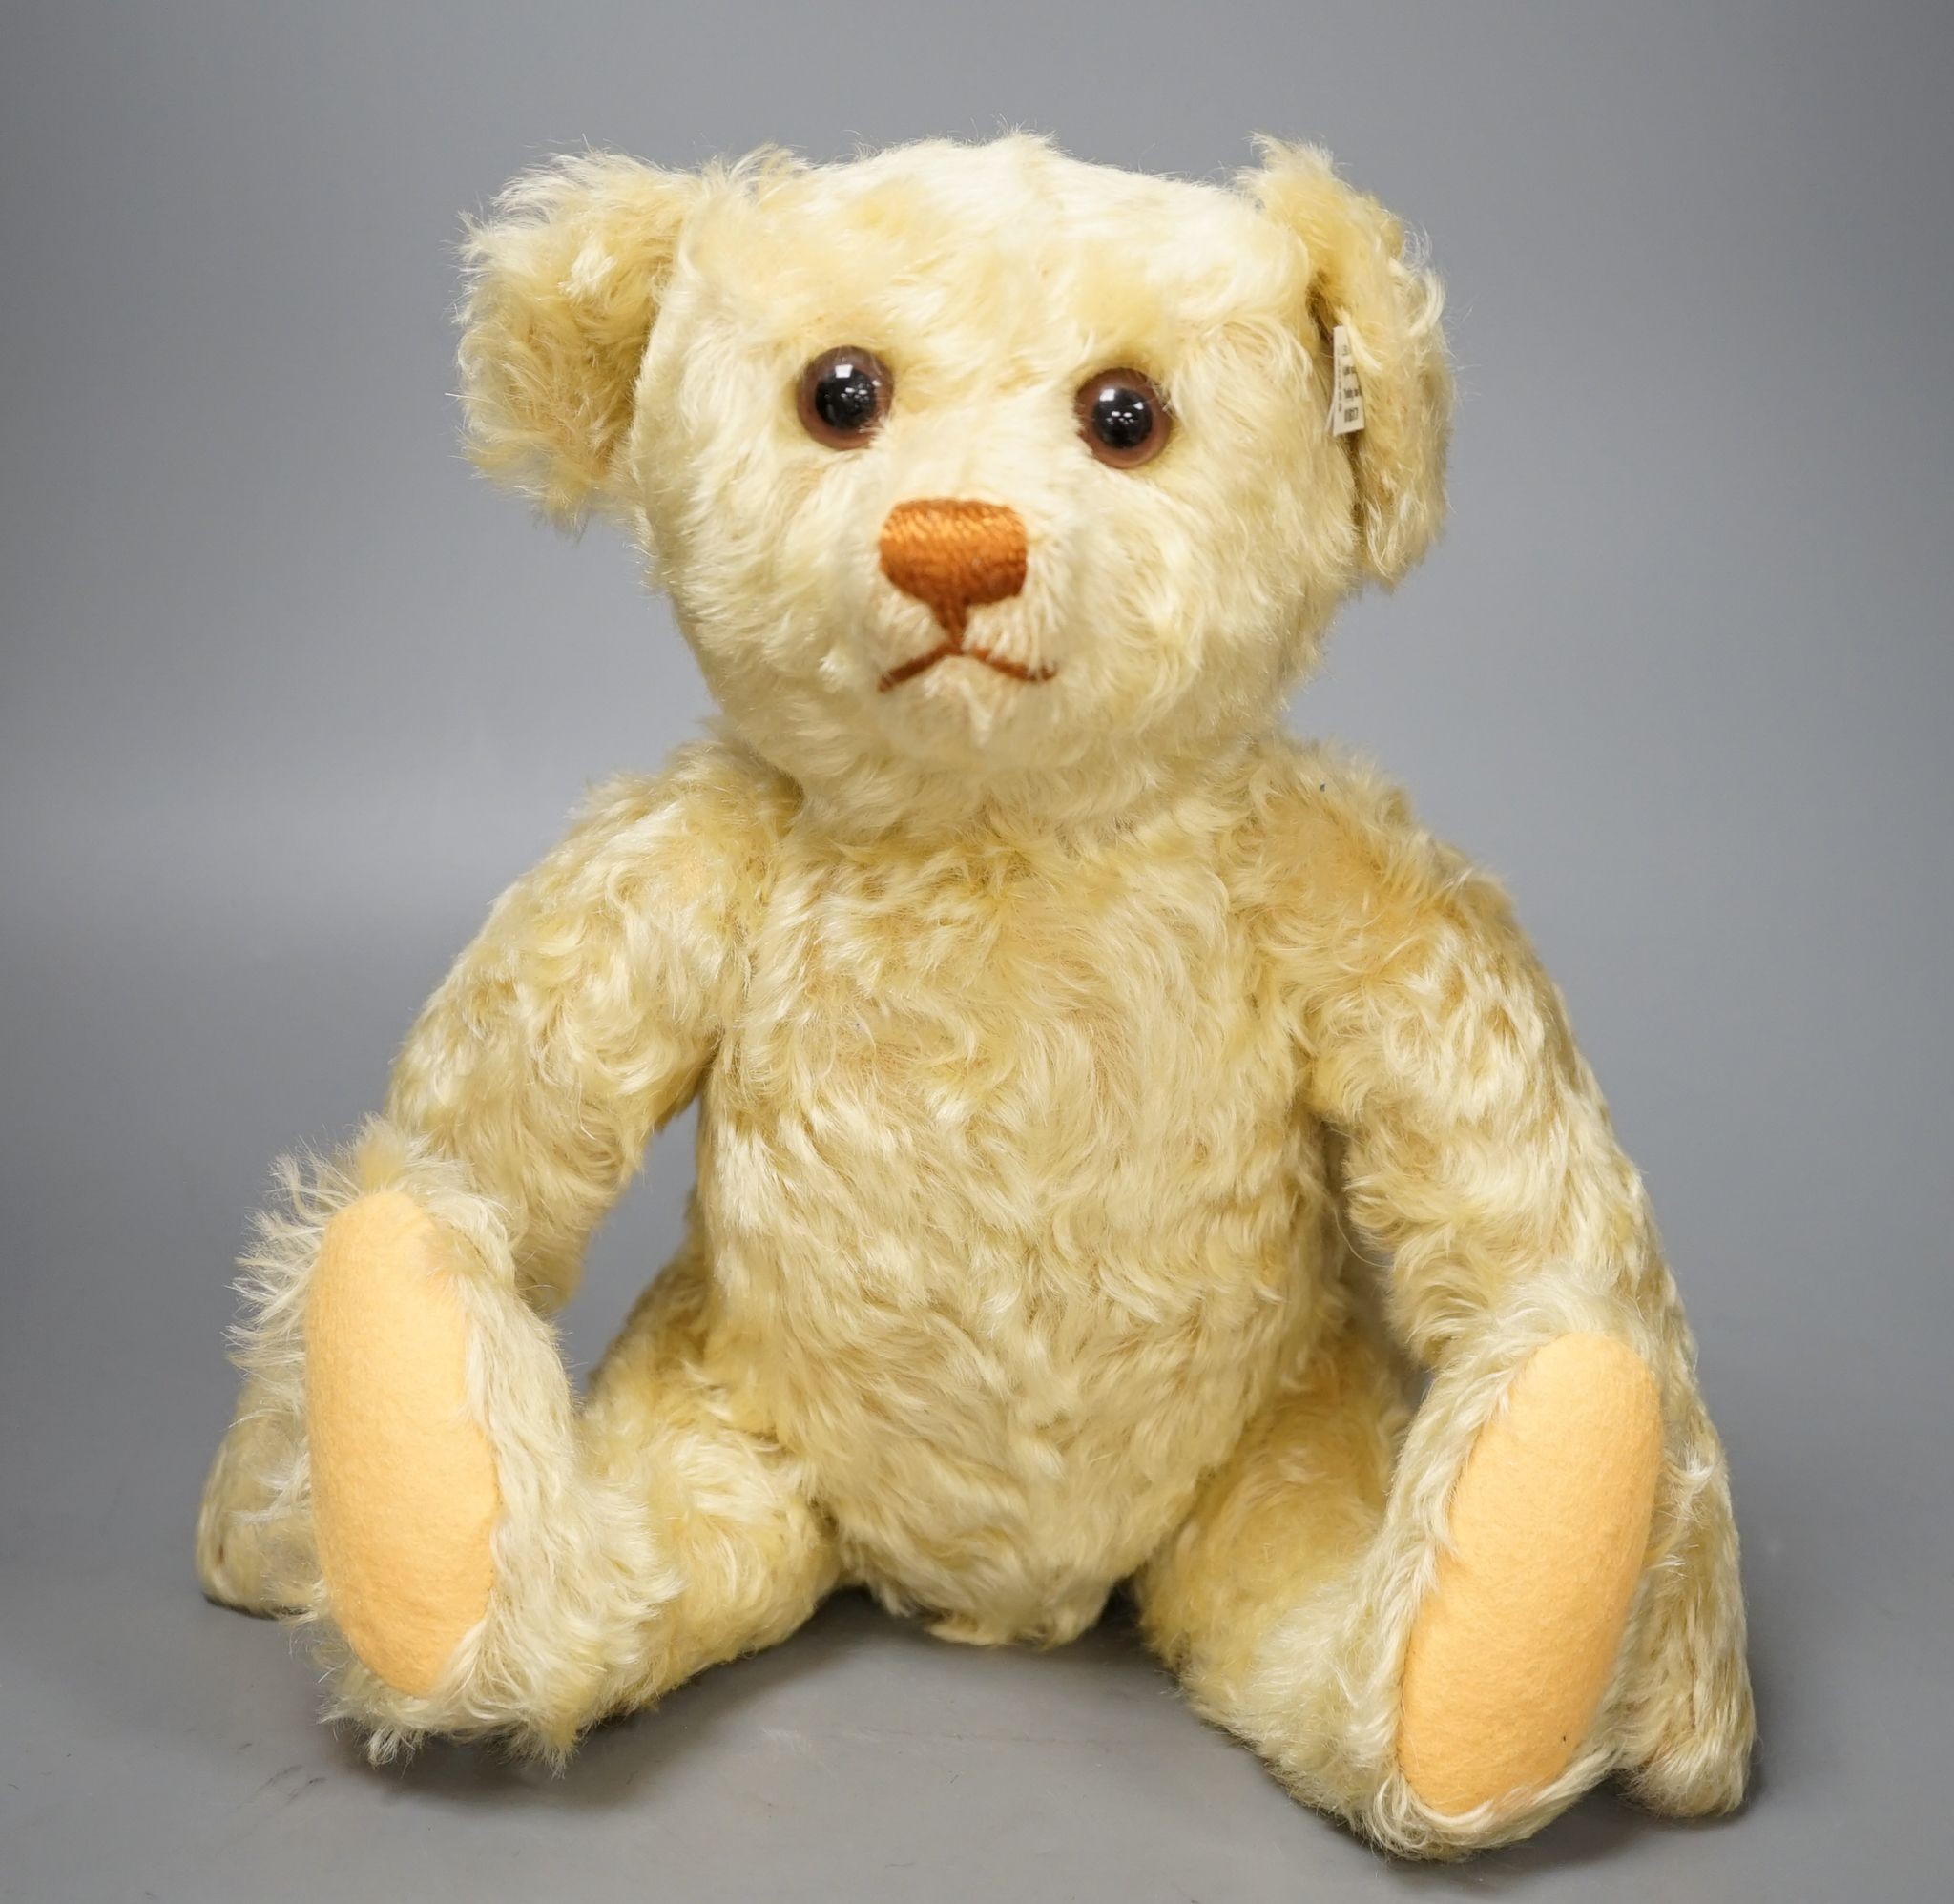 Steiff for British Collectors 2003 teddy bear, with box and certificate Limited Edition 36cm